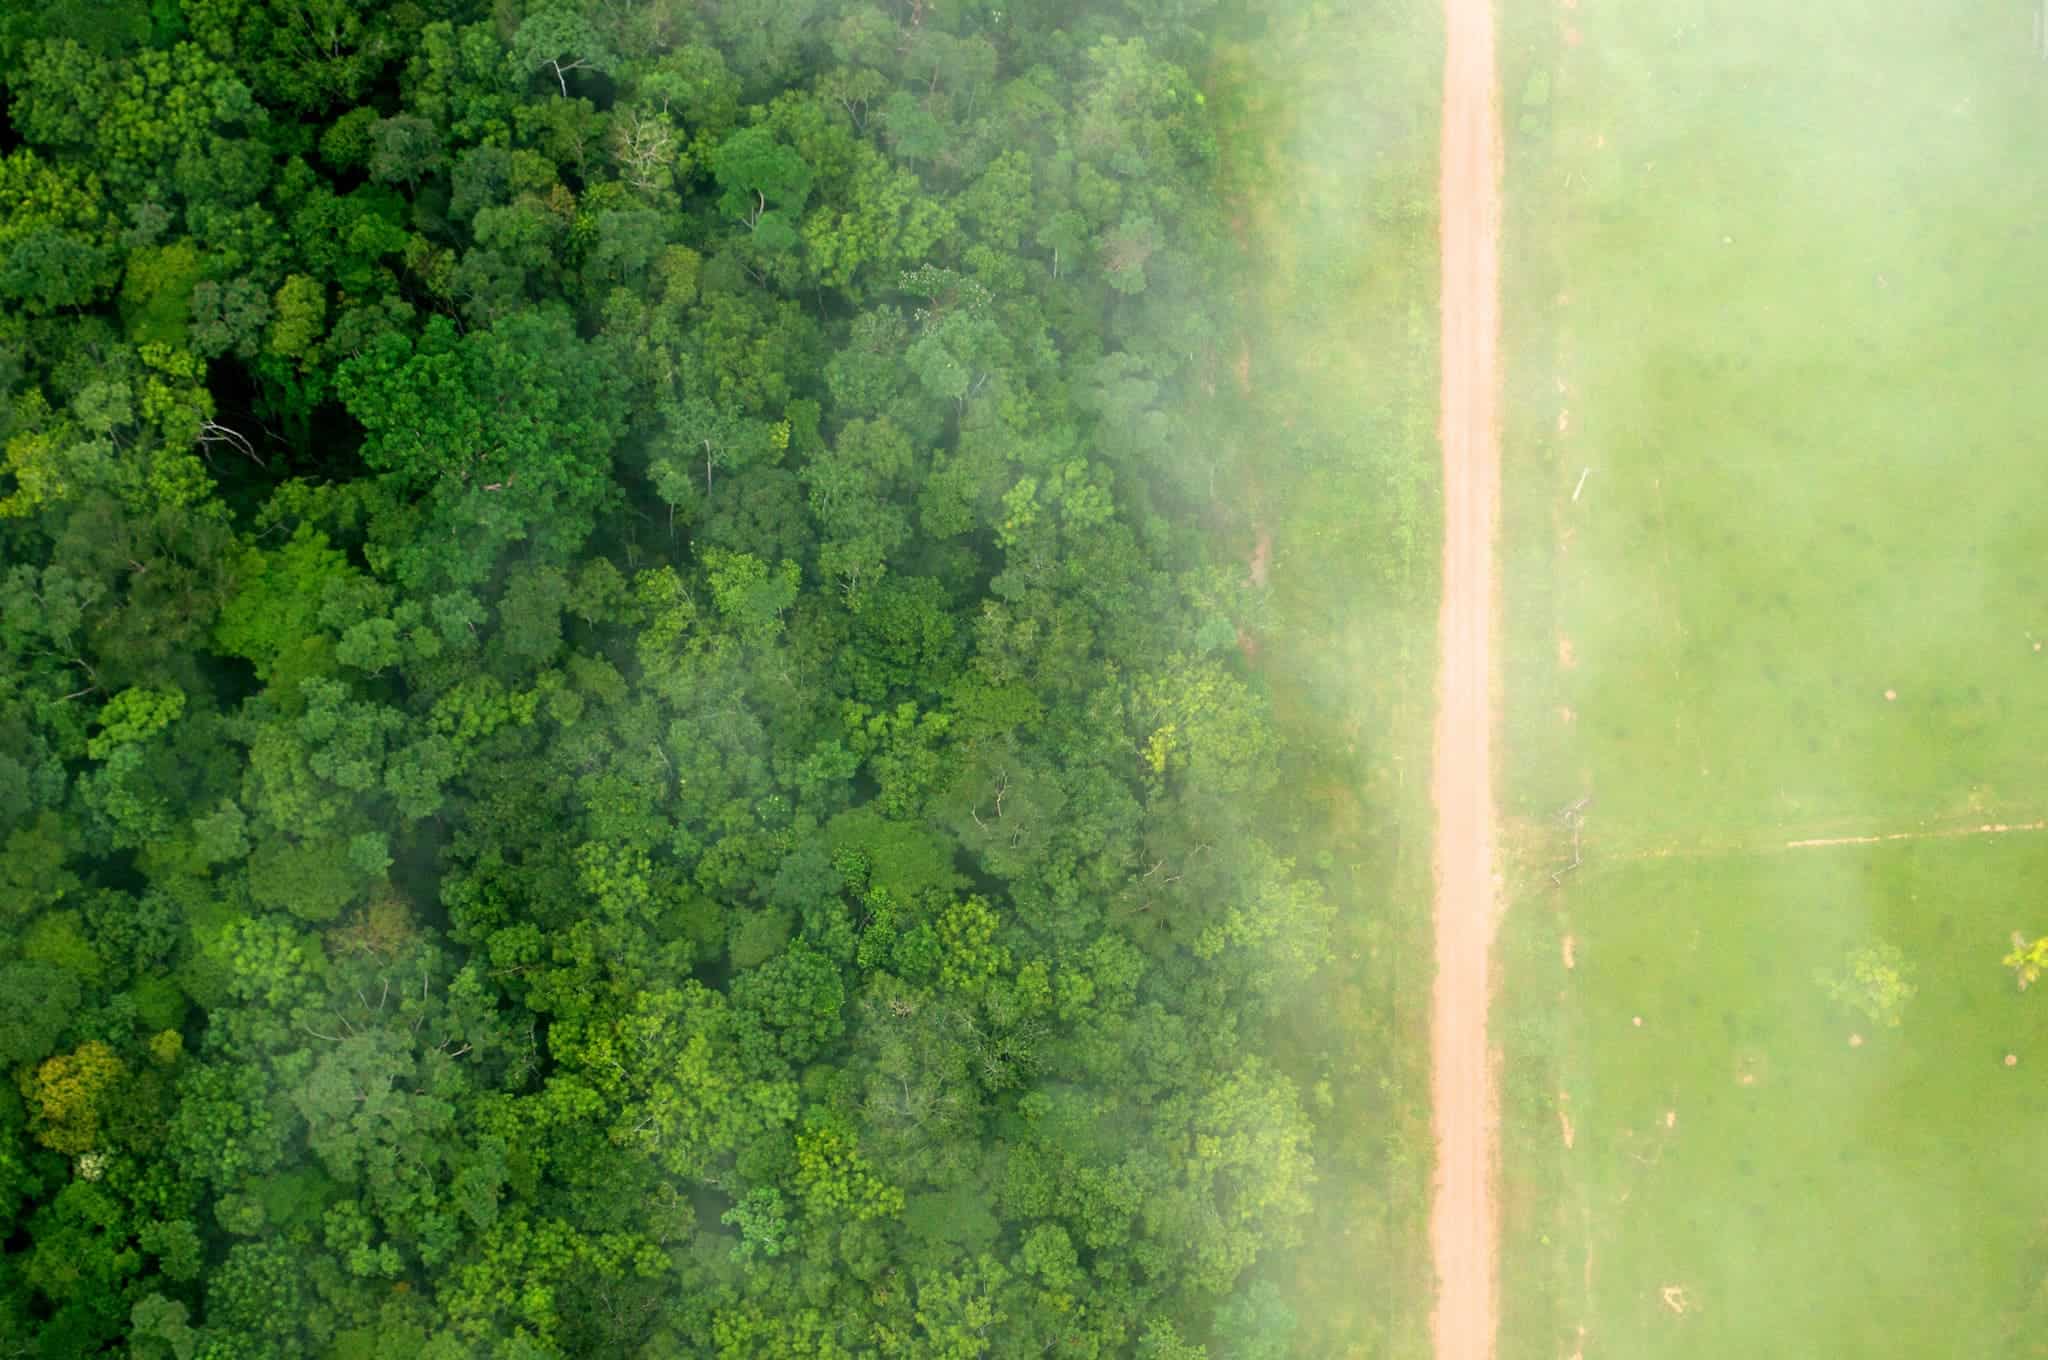 A bird's eye view of the stark contrast between the forest and agricultural landscapes near Rio Branco, Acre, Brazil.   Photo by Kate Evans/CIFOR   cifor.org  blog.cifor.org  If you use one of our photos, please credit it accordingly and let us know. You can reach us through our Flickr account or at: cifor-mediainfo@cgiar.org and m.edliadi@cgiar.org